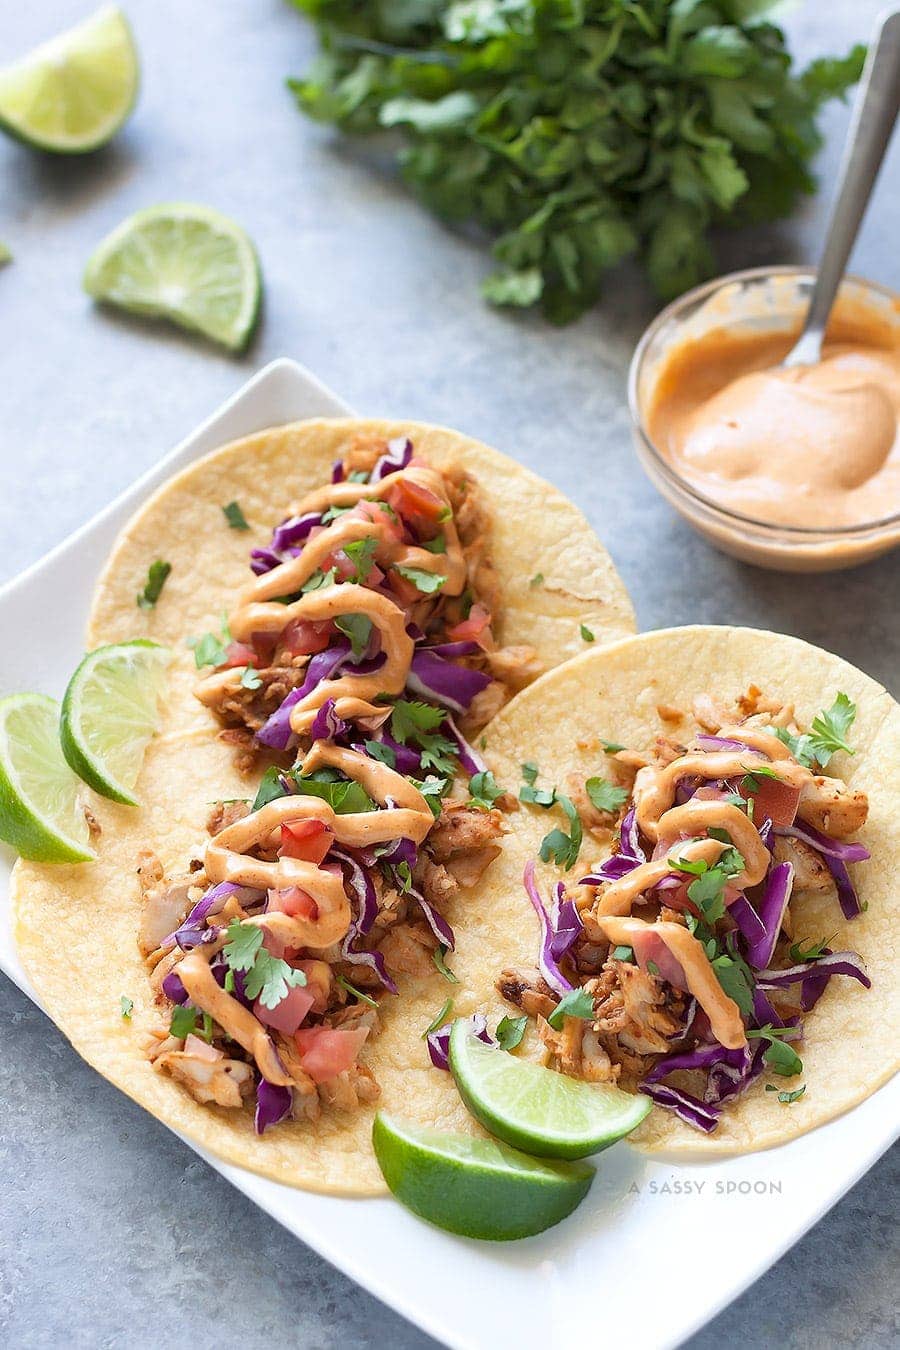 15-Minute Spicy Fish Tacos with Slaw - A Sassy Spoon